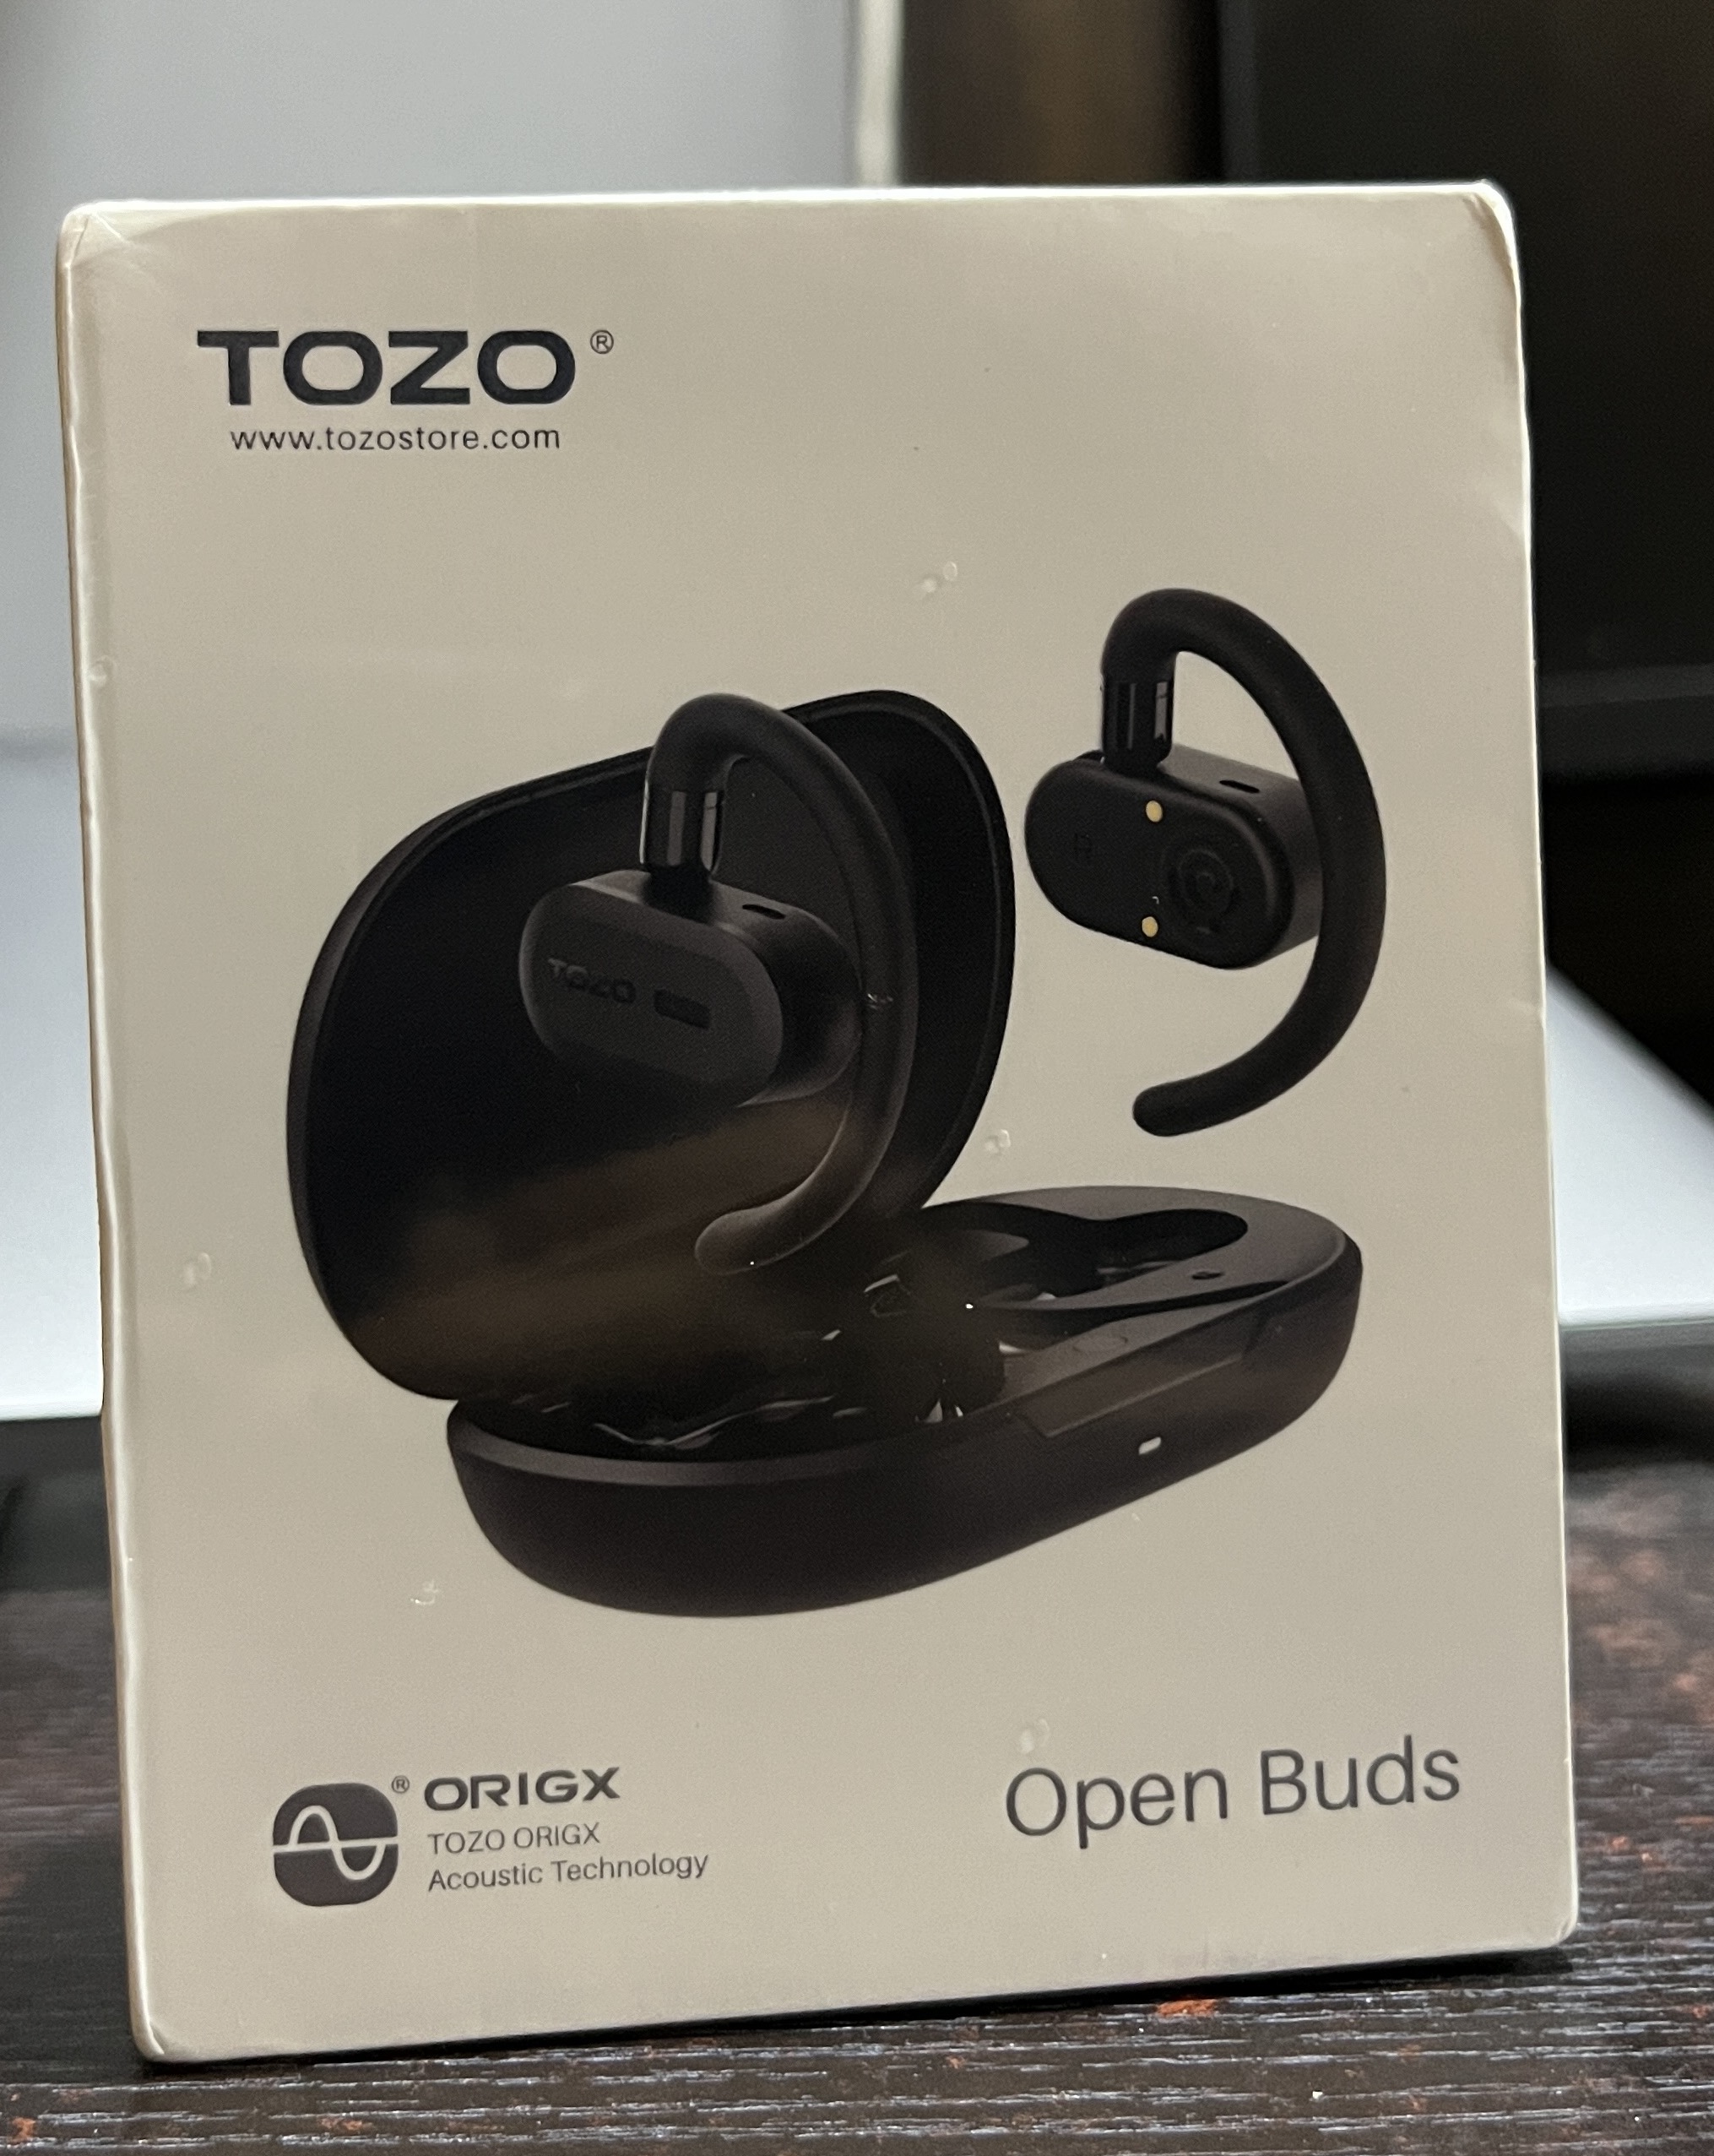  TOZO OpenBuds Review